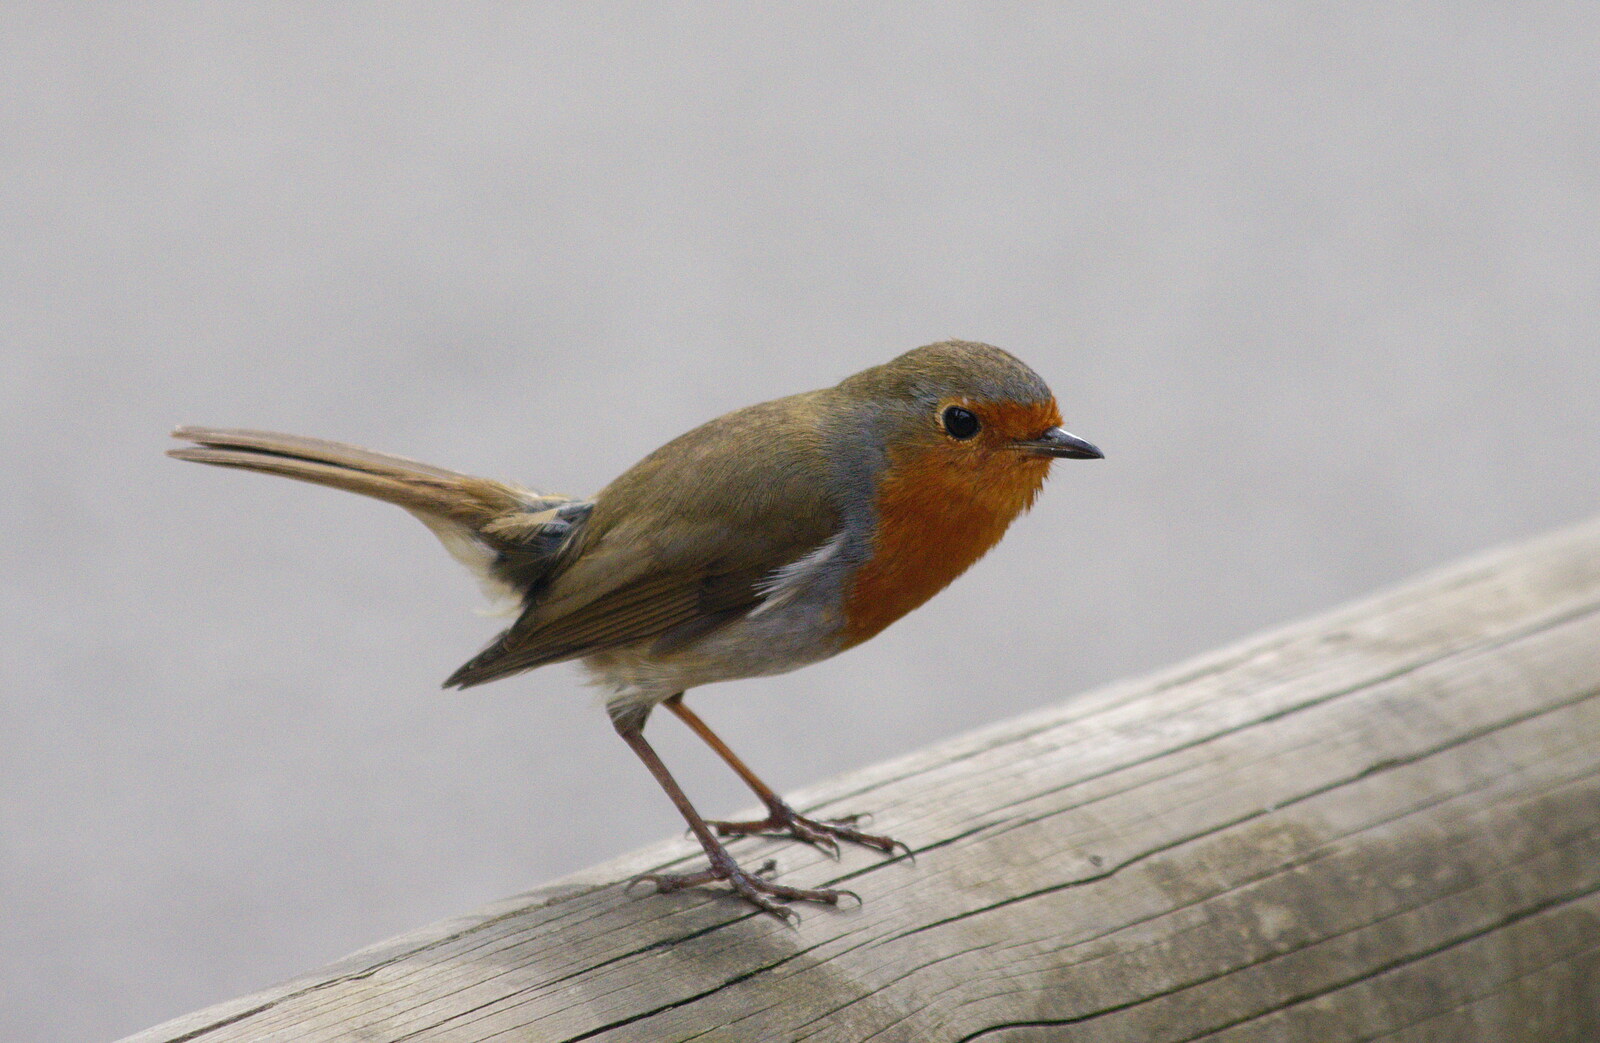 A Birthday Trip to the Zoo, Banham, Norfolk - 26th May 2014: A robin on a fence post